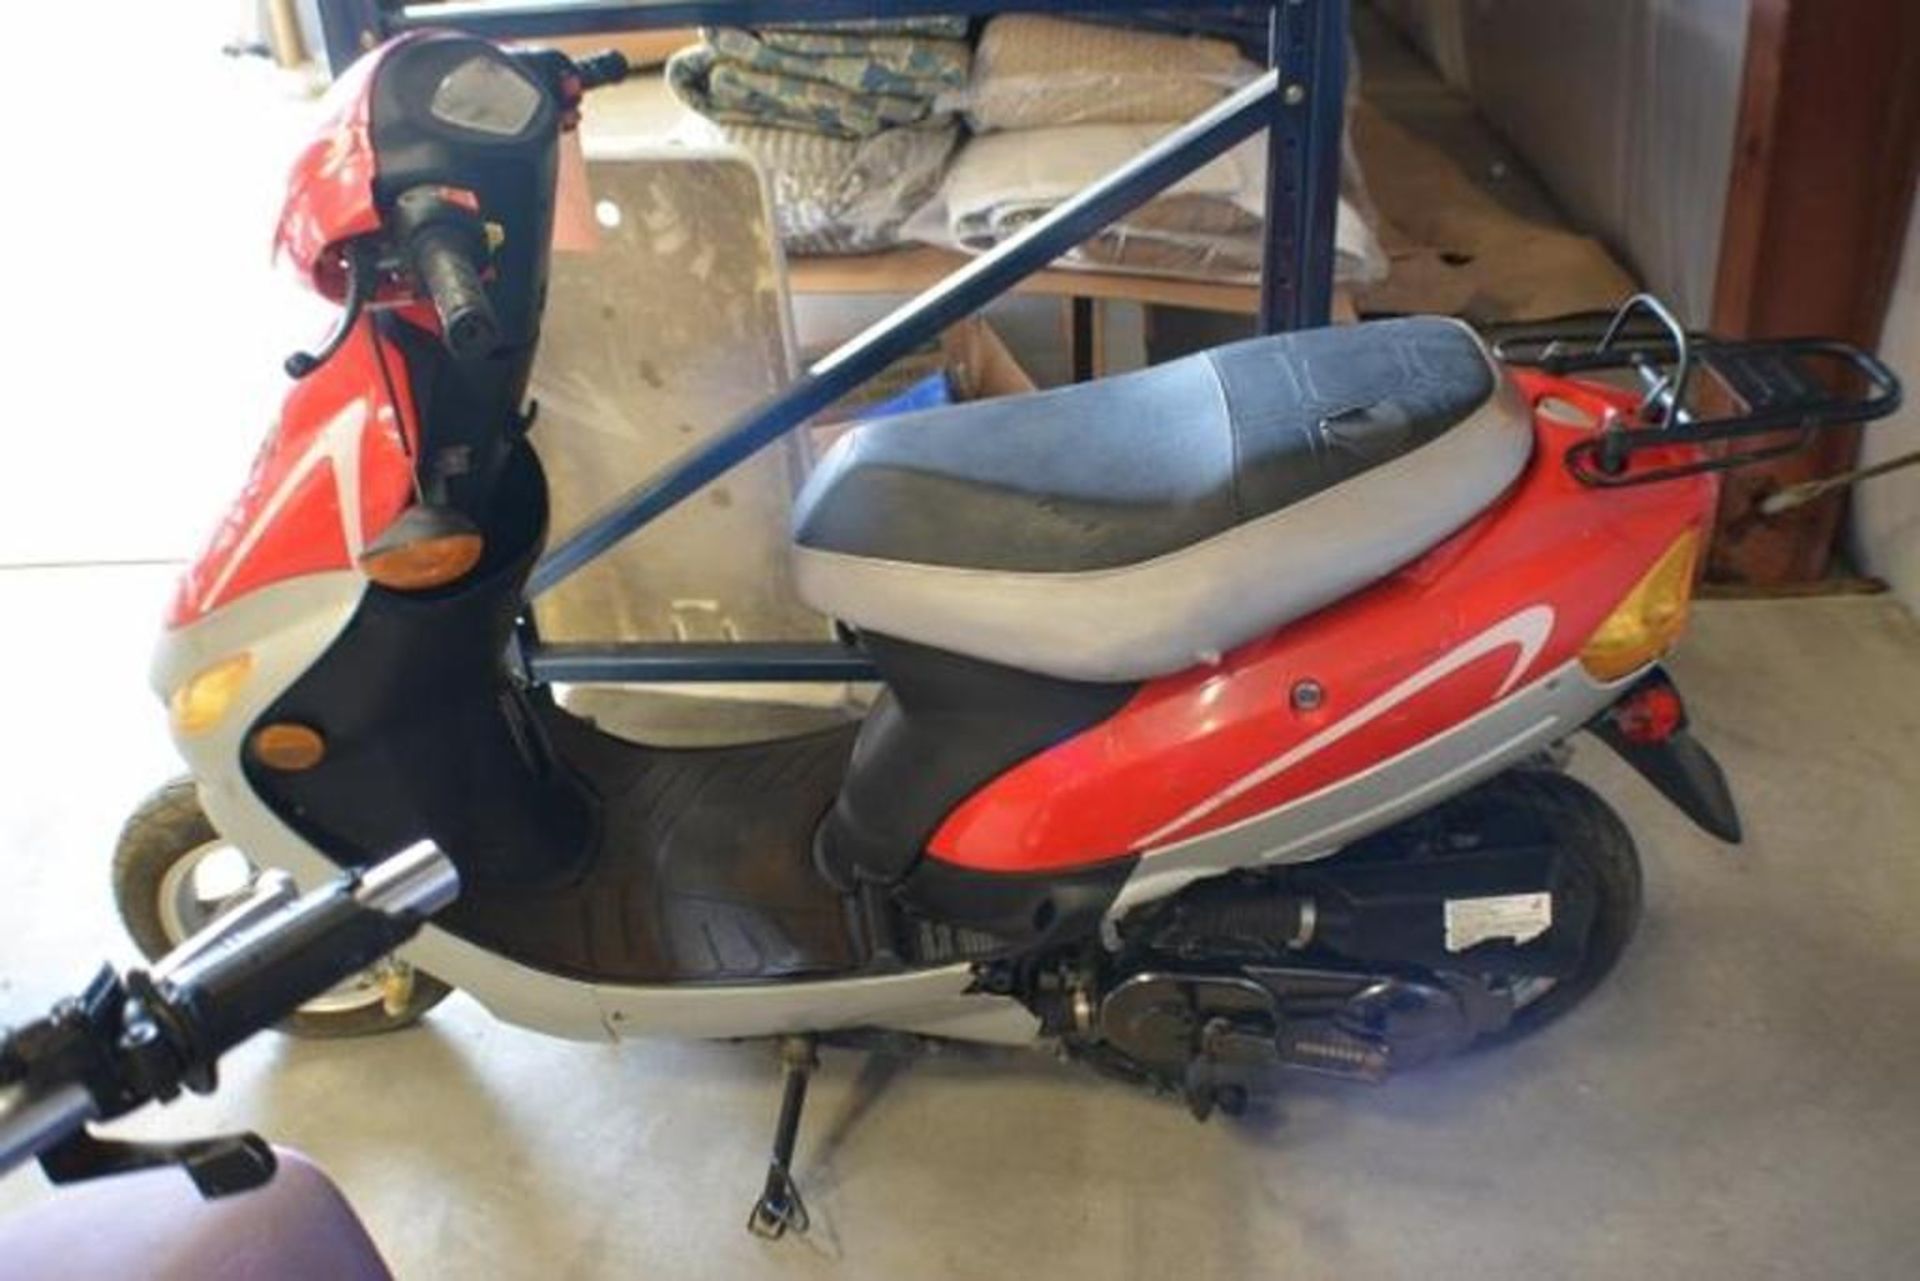 ATV 90cc 4 Stroke + Gasoline Scooter 50cc 4 Stroke for parts or Repair. Qty 2 One Lot - Image 3 of 6